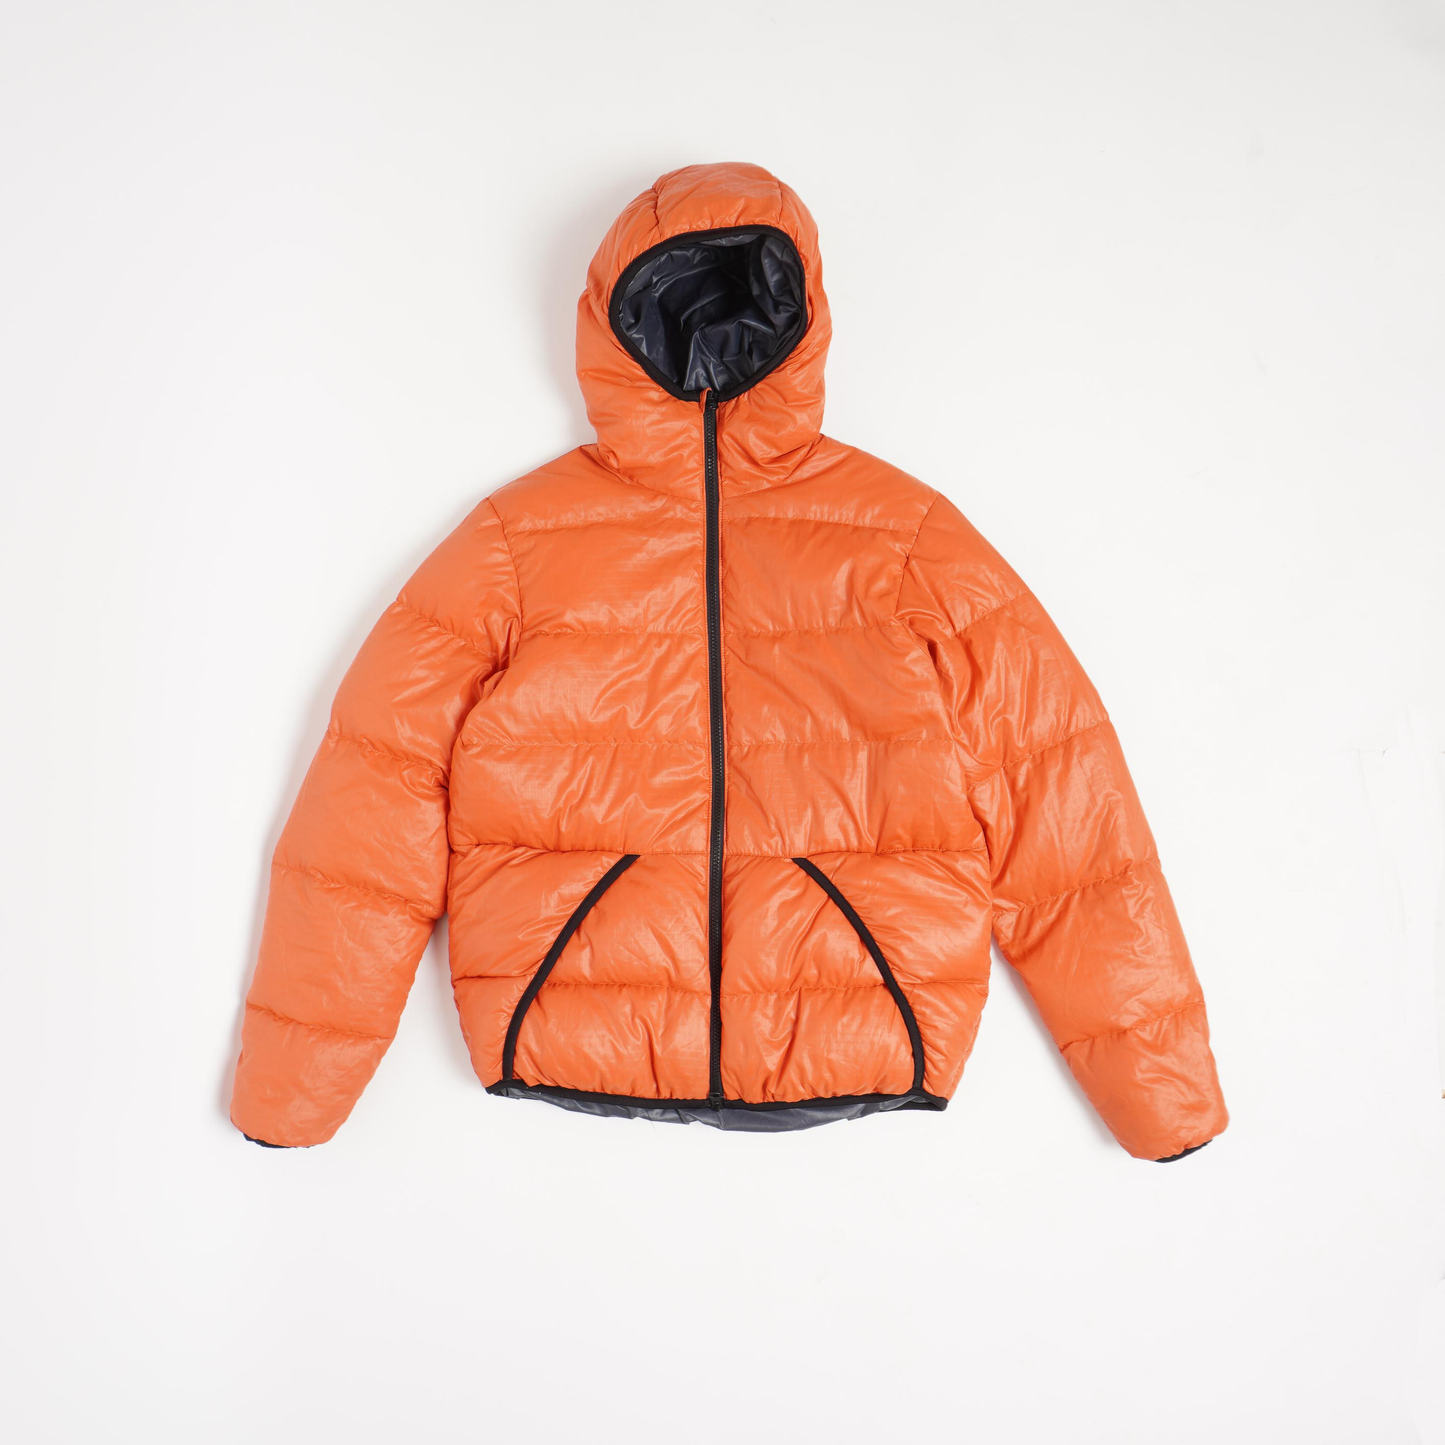 1990s REVERSIBLE PUFFER DOWN JACKET - L